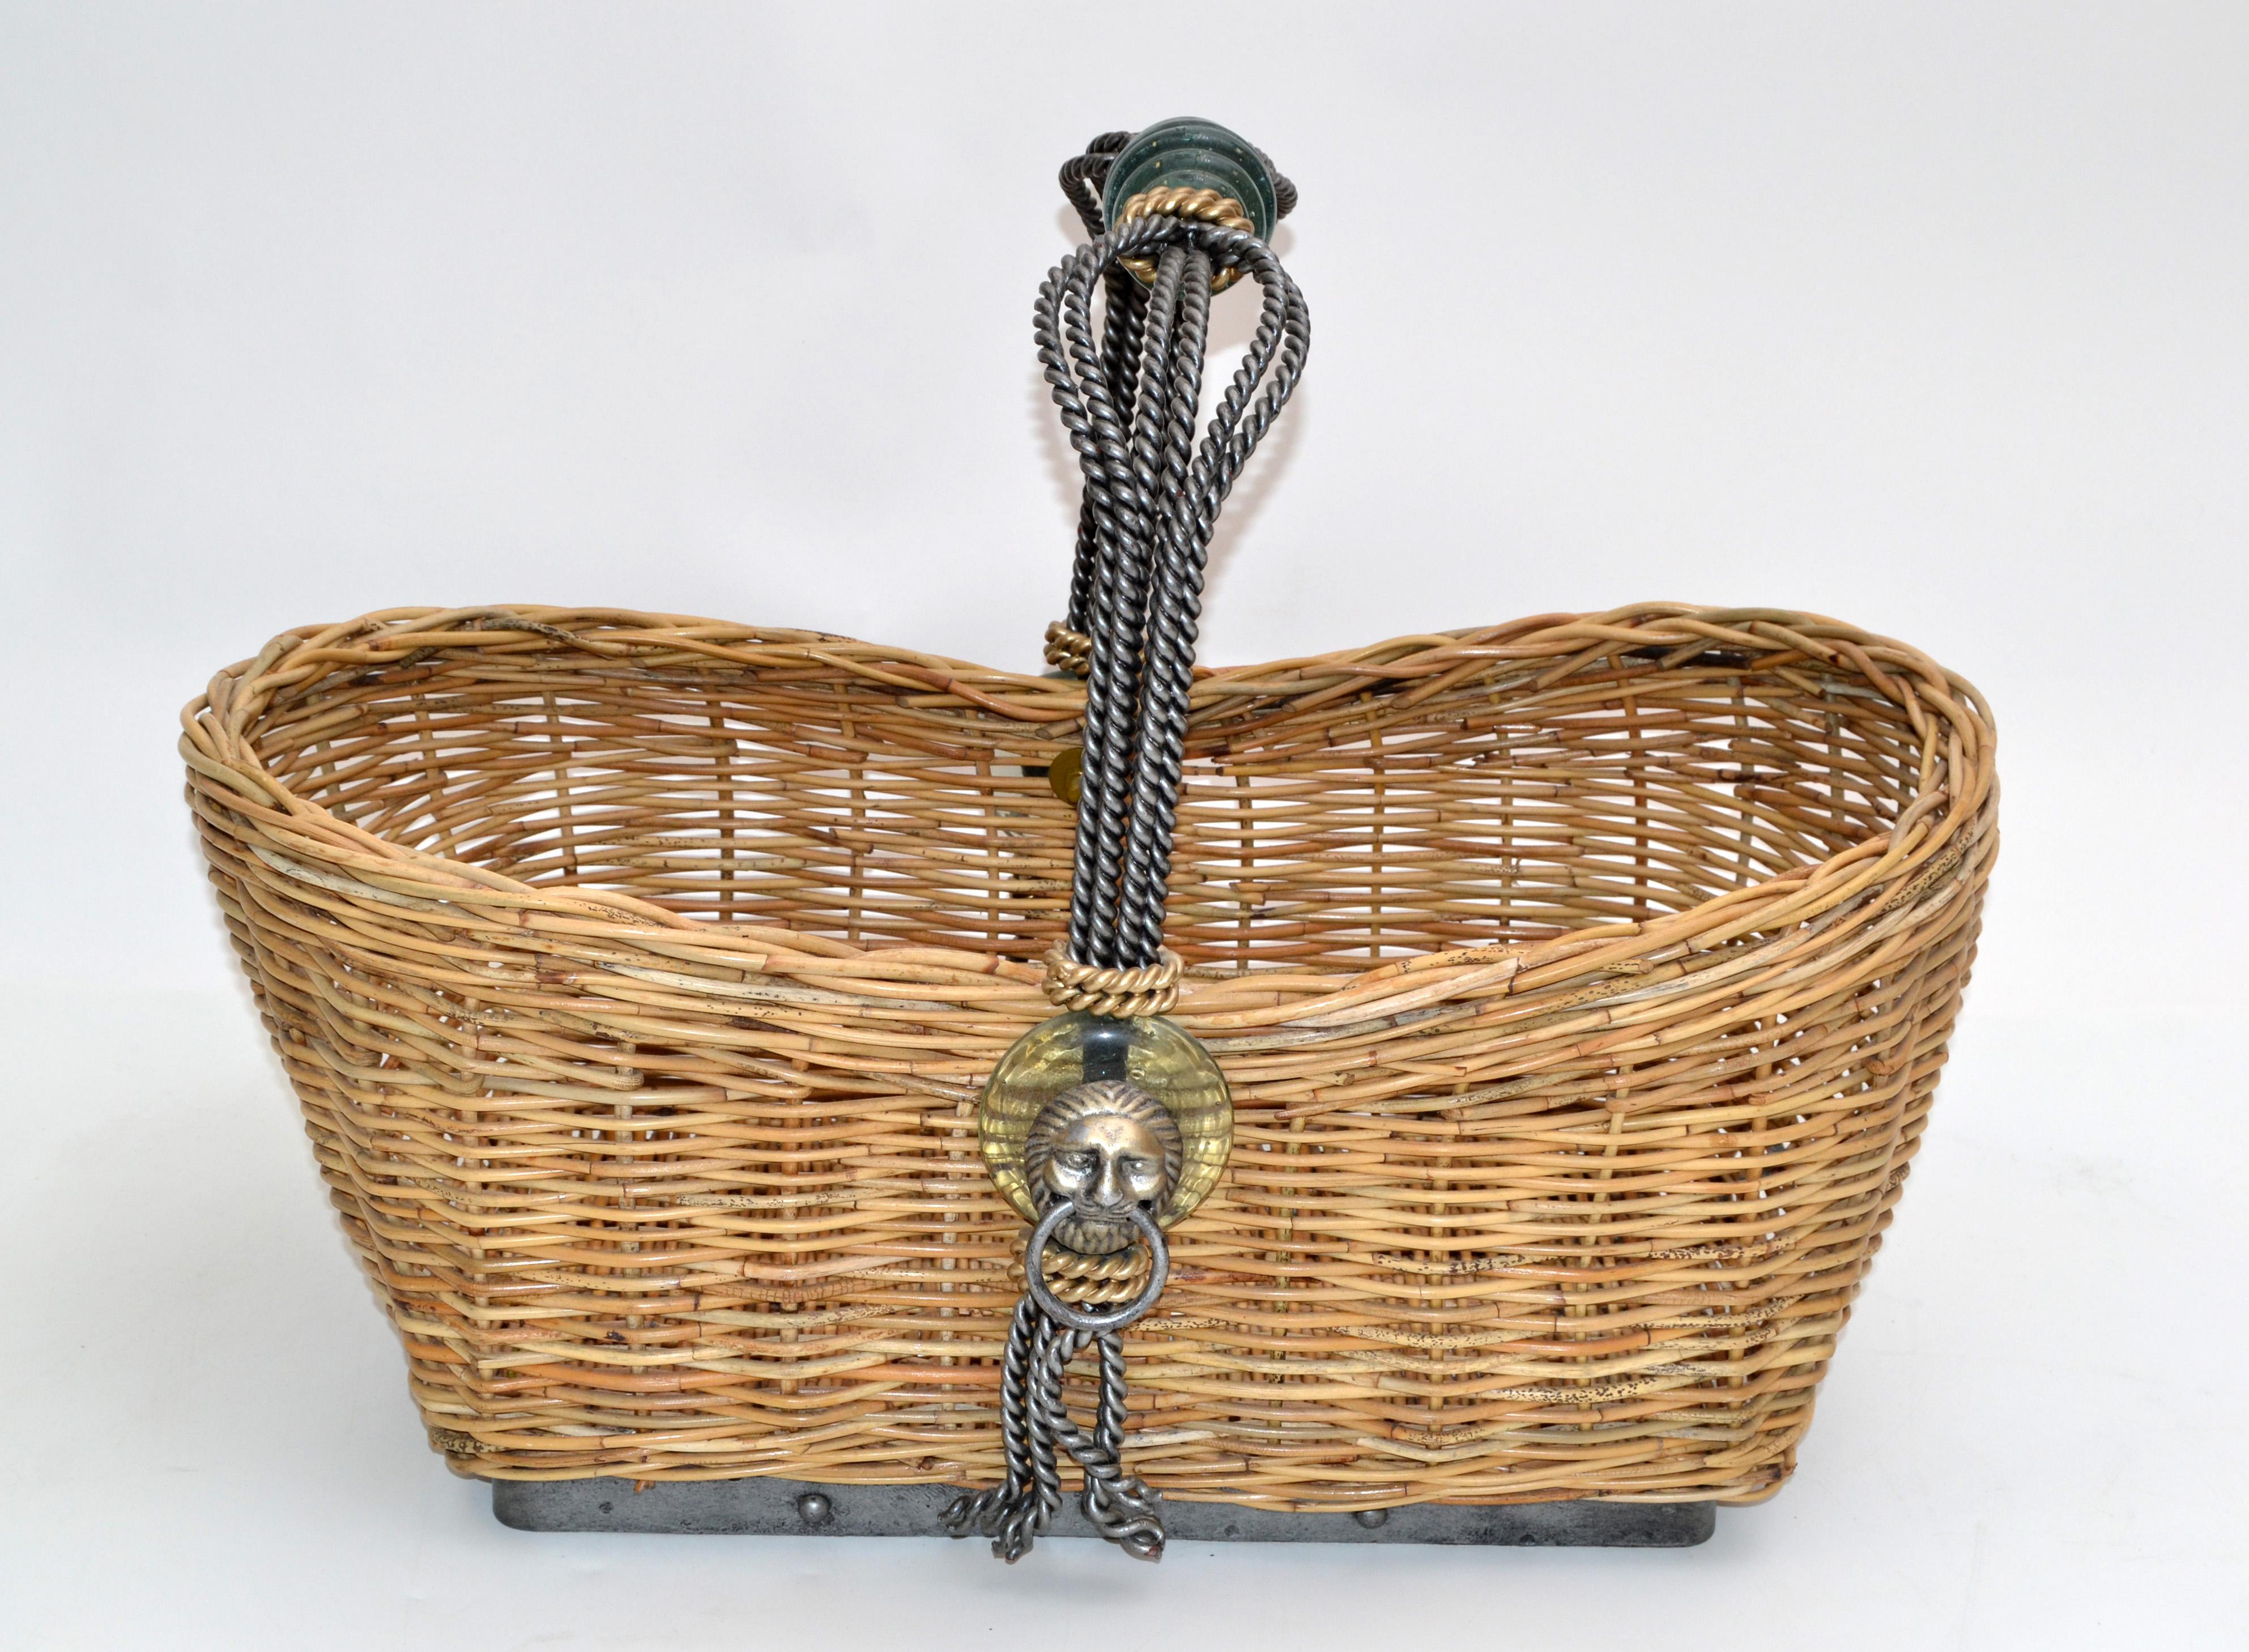 Vintage handmade Maitland Smith Basket made out of hand-woven ficks reed, wrought iron & glass handle. Brass lion head decoration on both sides.
The basket has a large storage space for magazine's, books or newspaper and looks stunning beside your